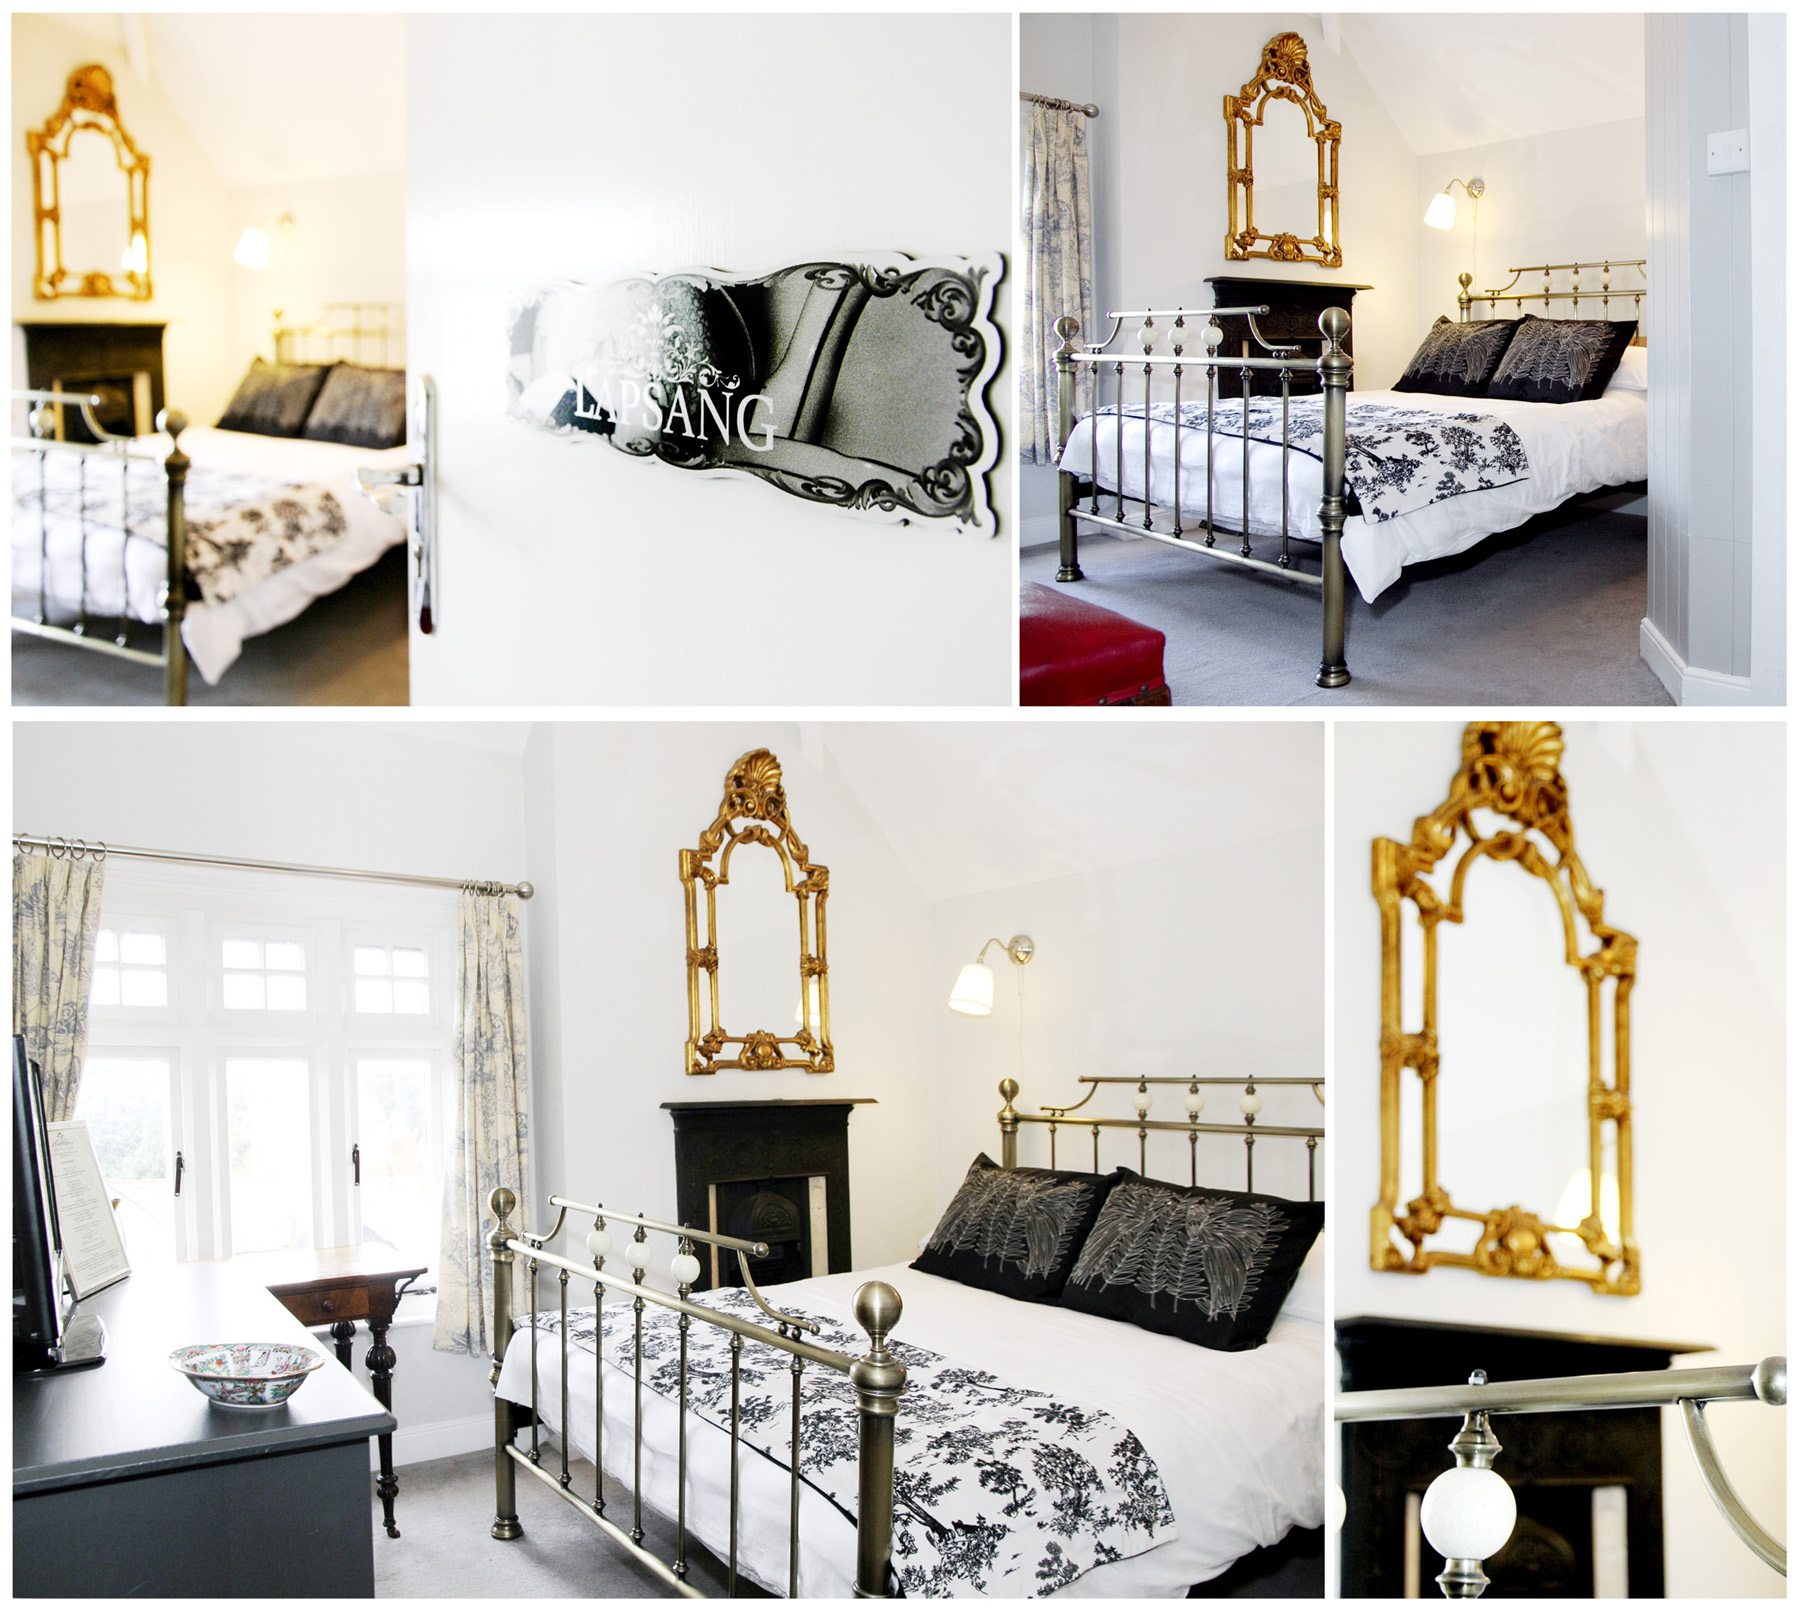 Afternoon tea: Portfolio for Maryville House a Victorian residence in Belfast transformed into a Boutique B&B.